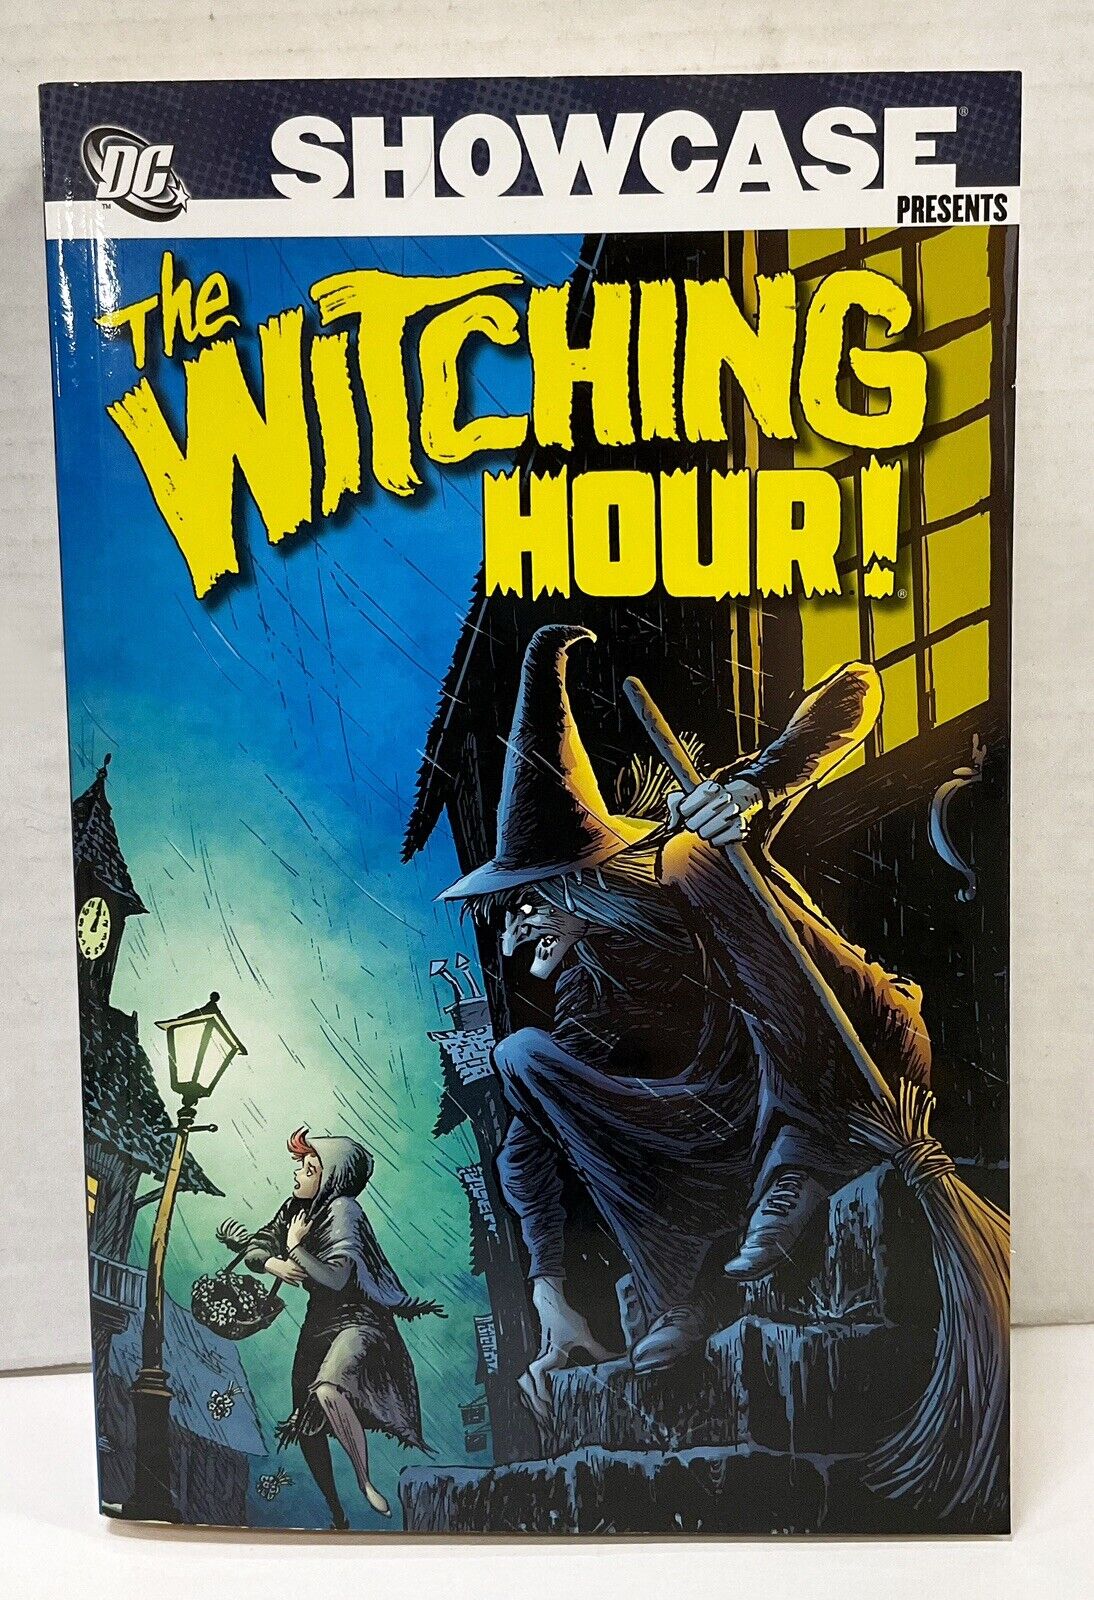 DC Comics Showcase Presents: The Witching Hour Vol. 1 - Near Mint 1st Printing